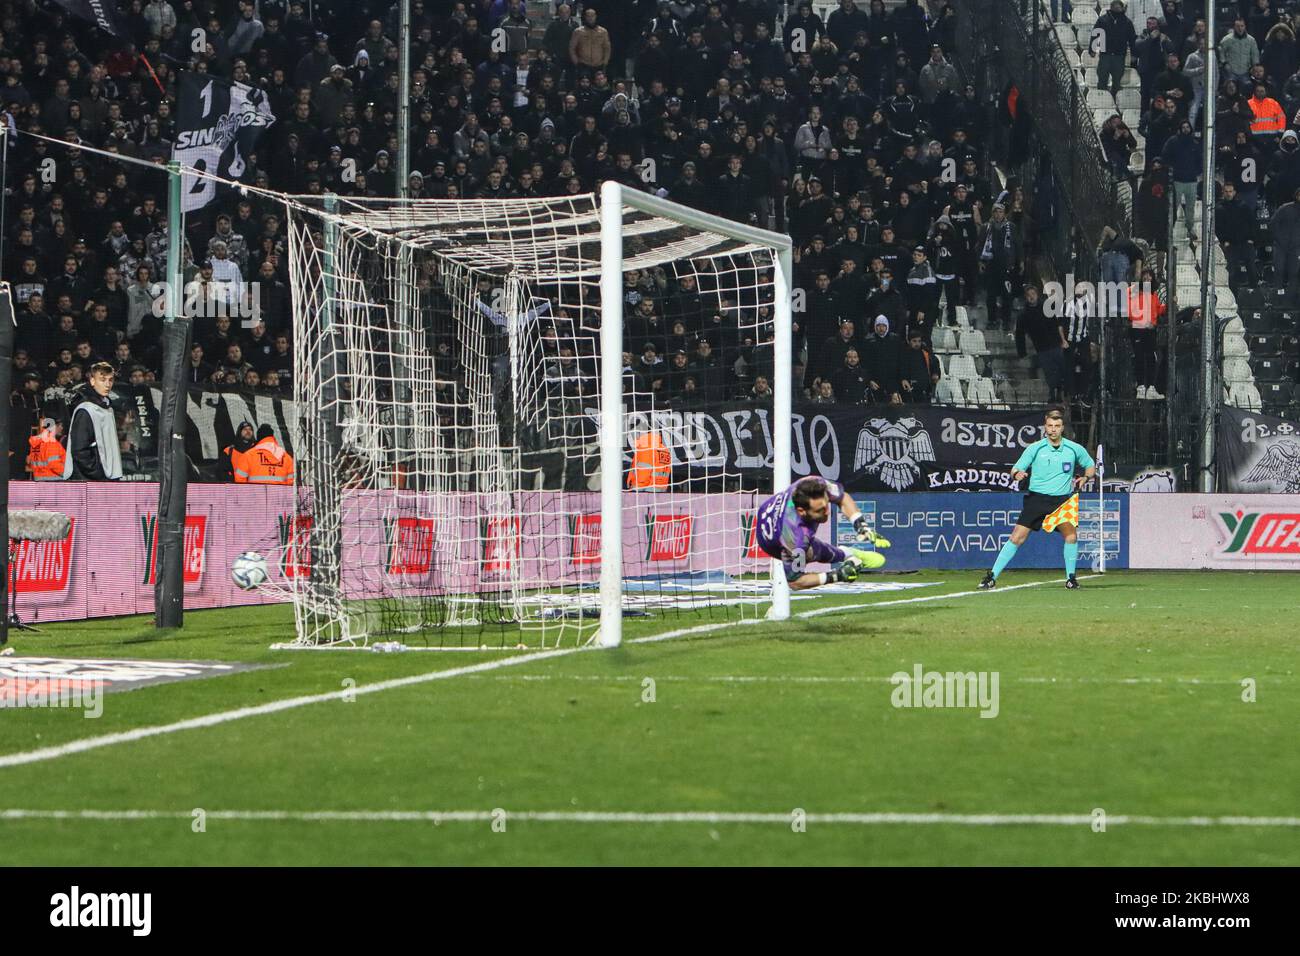 Chuba Amechi Akpom #47 striker of PAOK FC striking his second goal, a penalty goal in the match during PAOK Thessaloniki v OFI Crete FC with final score 4-0 for Super League 1 Greece at Toumba Stadium home of PAOK in Thessaloniki. Akpom scored the first and second (penalty) of PAOK. Chuba Akpom is an English professional footballer striker player with previous career in Arsenal and as a loan to Brentford, Coventry City, Nottingham Forest, Hull City, Brighton, Hove Albion and Sint-Truiden. He had also participations in the young national teams of England U16, U17, U18, U19, U20, U21. February 9 Stock Photo